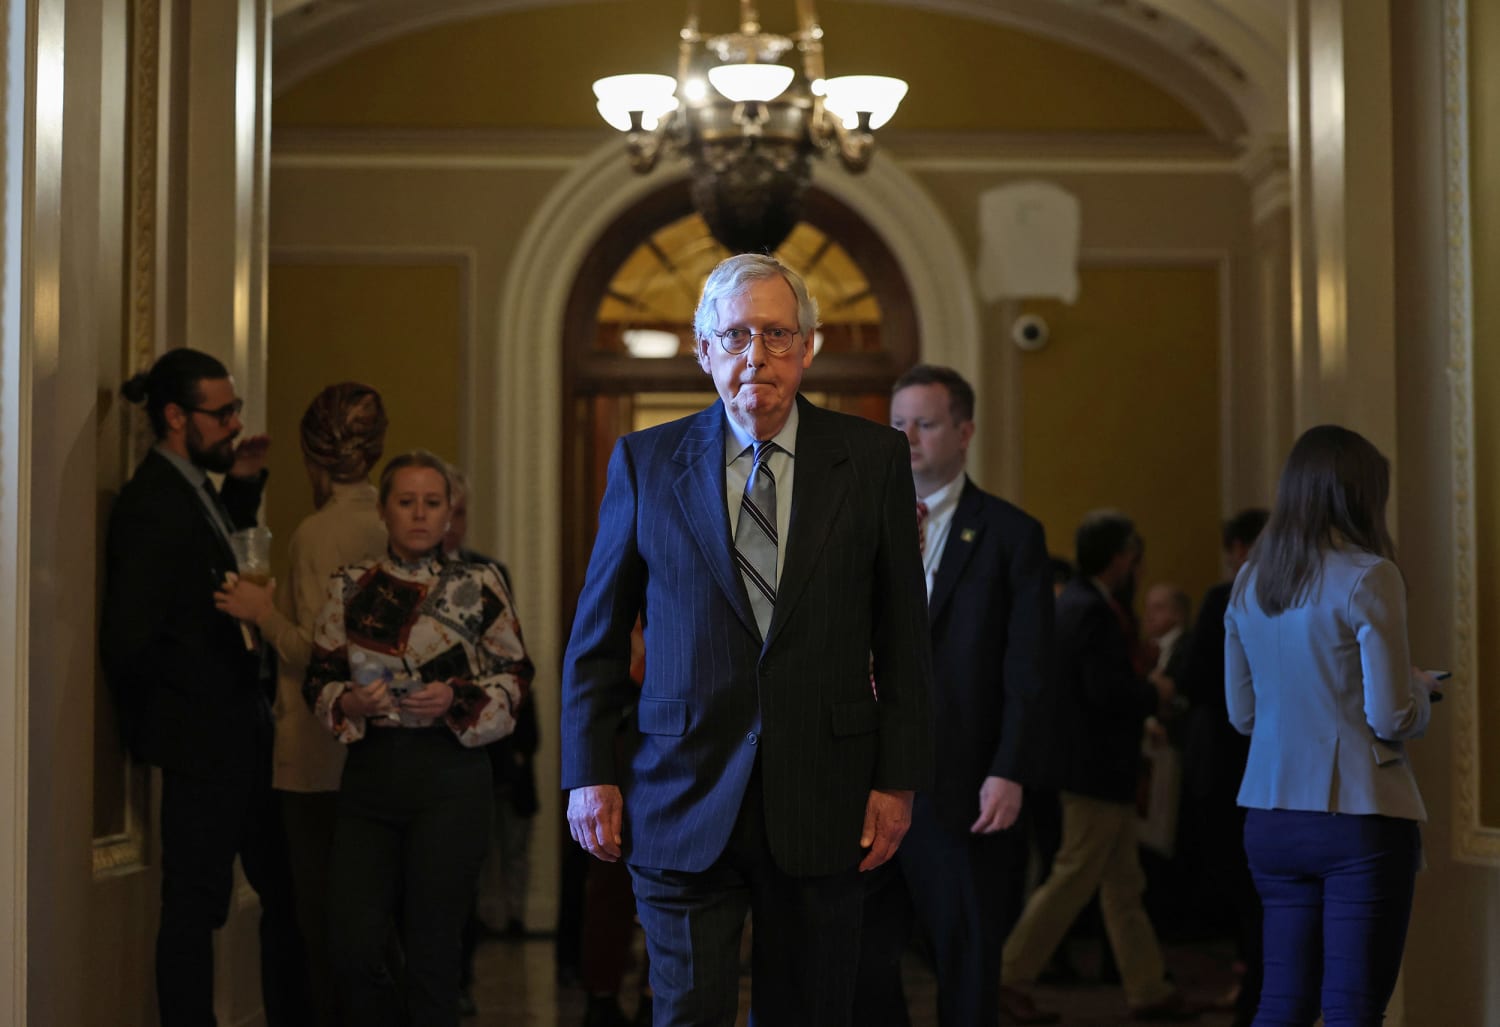 How are Senate Republicans dealing with Mitch McConnell’s absence?